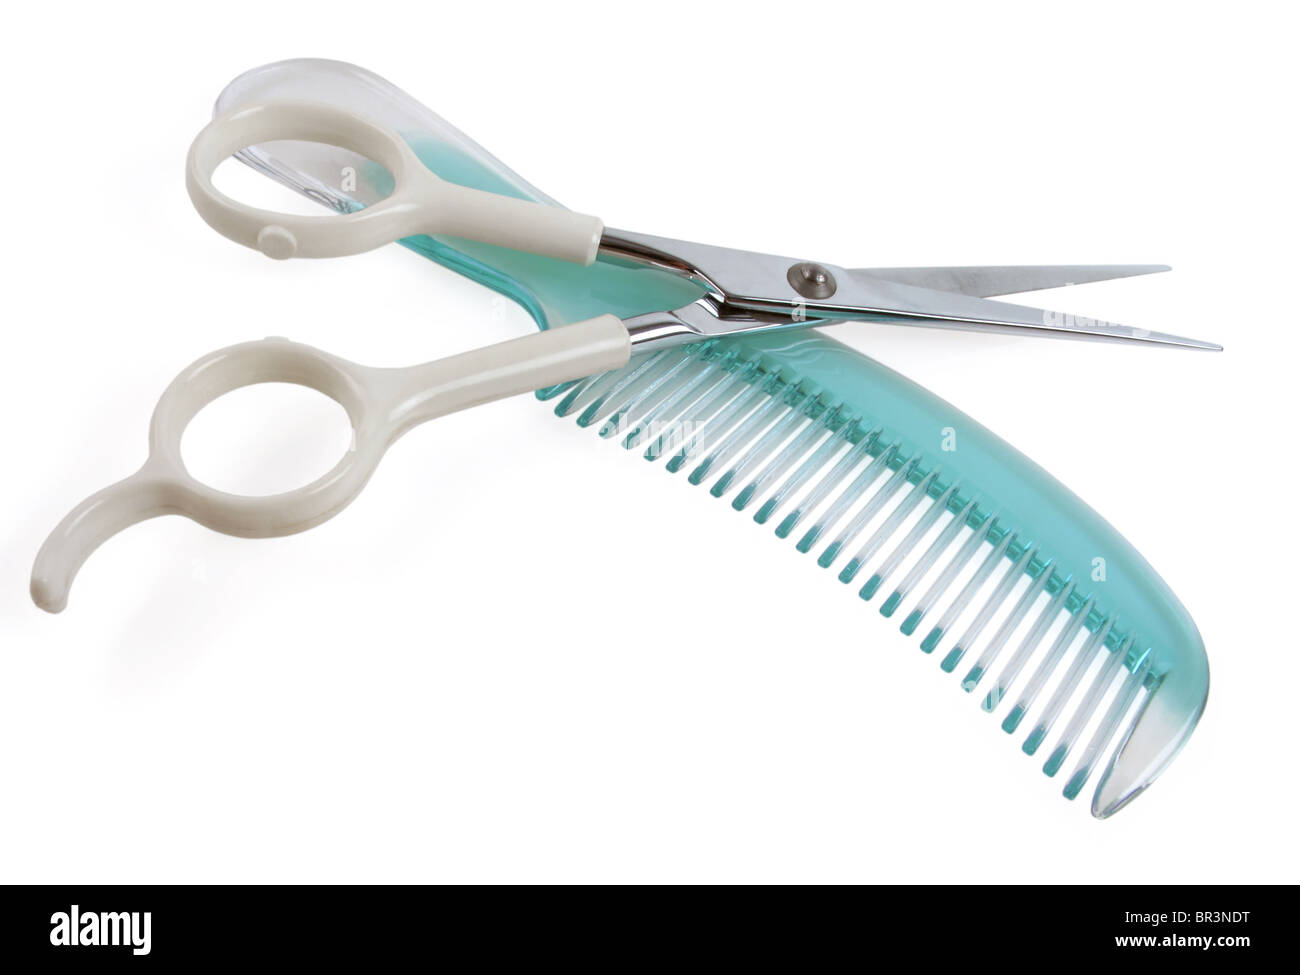 Clean and colorful comb and scissor ready for a haircut Stock Photo